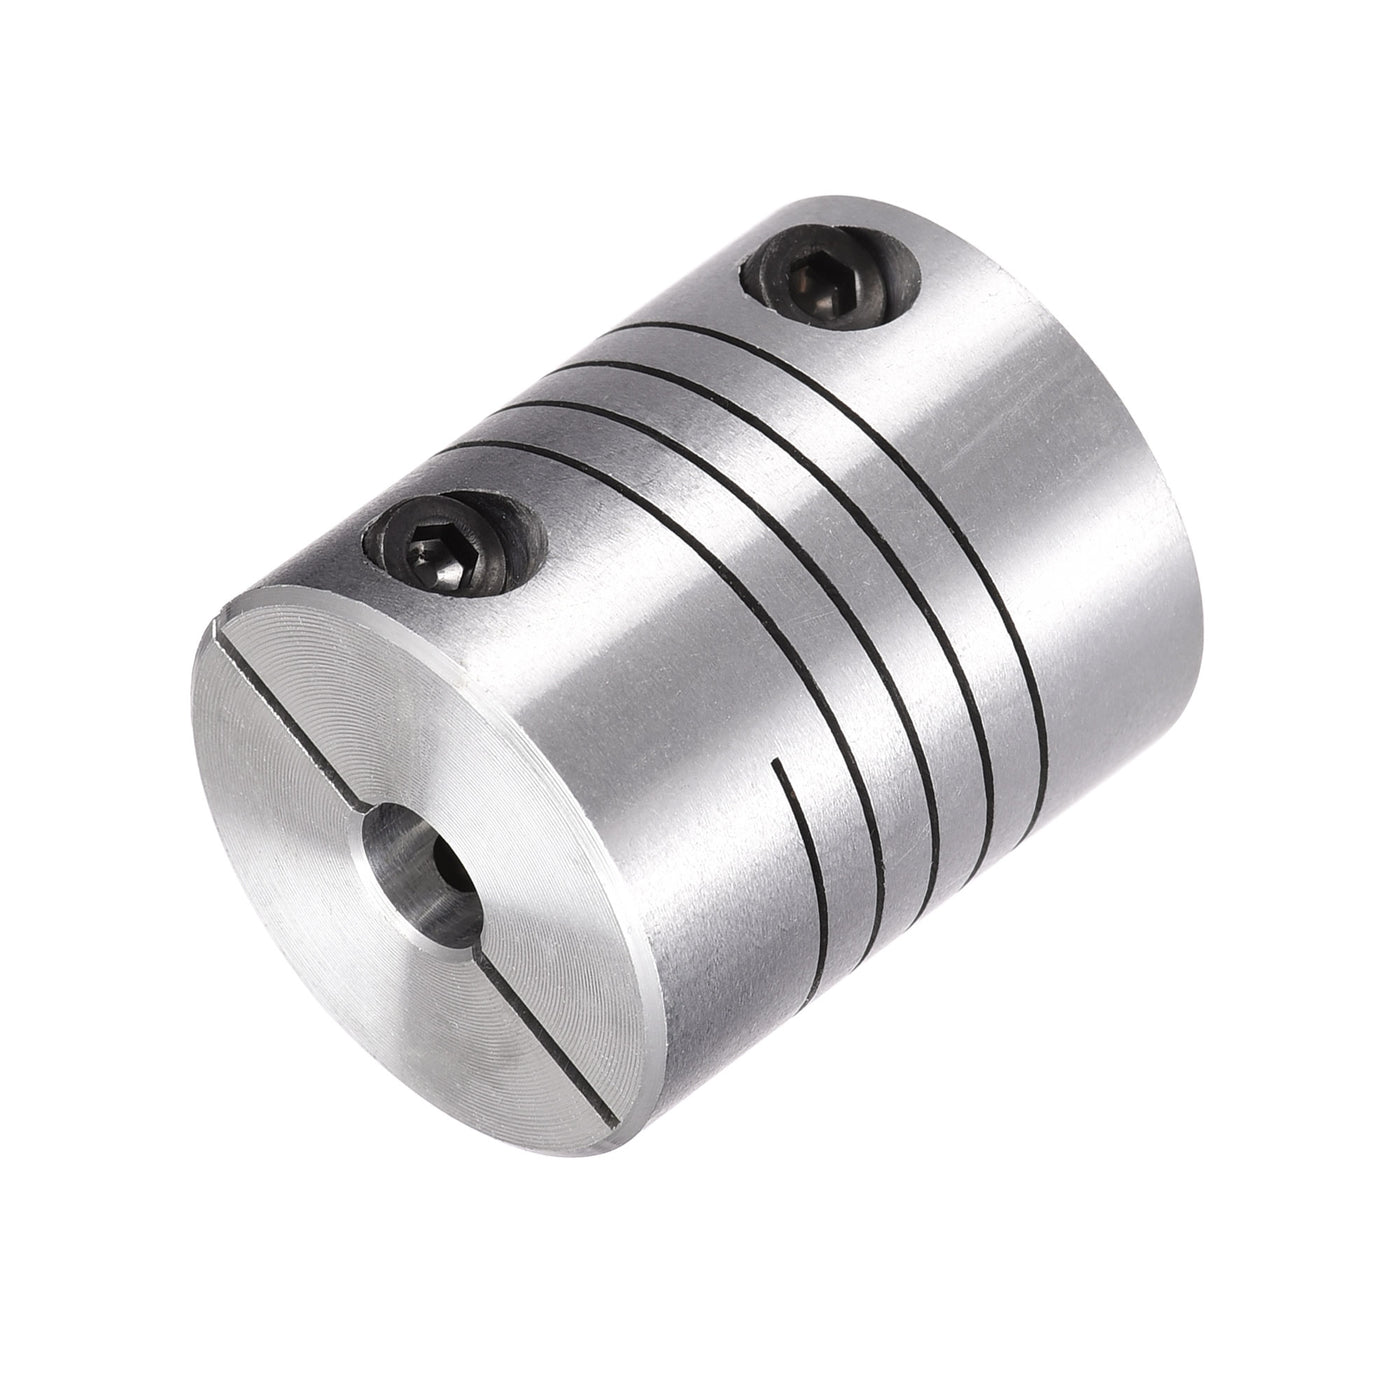 uxcell Uxcell 2PCS Motor Shaft 5mm to 6.35mm Helical Beam Coupler Coupling 25mm Dia 30mm Long